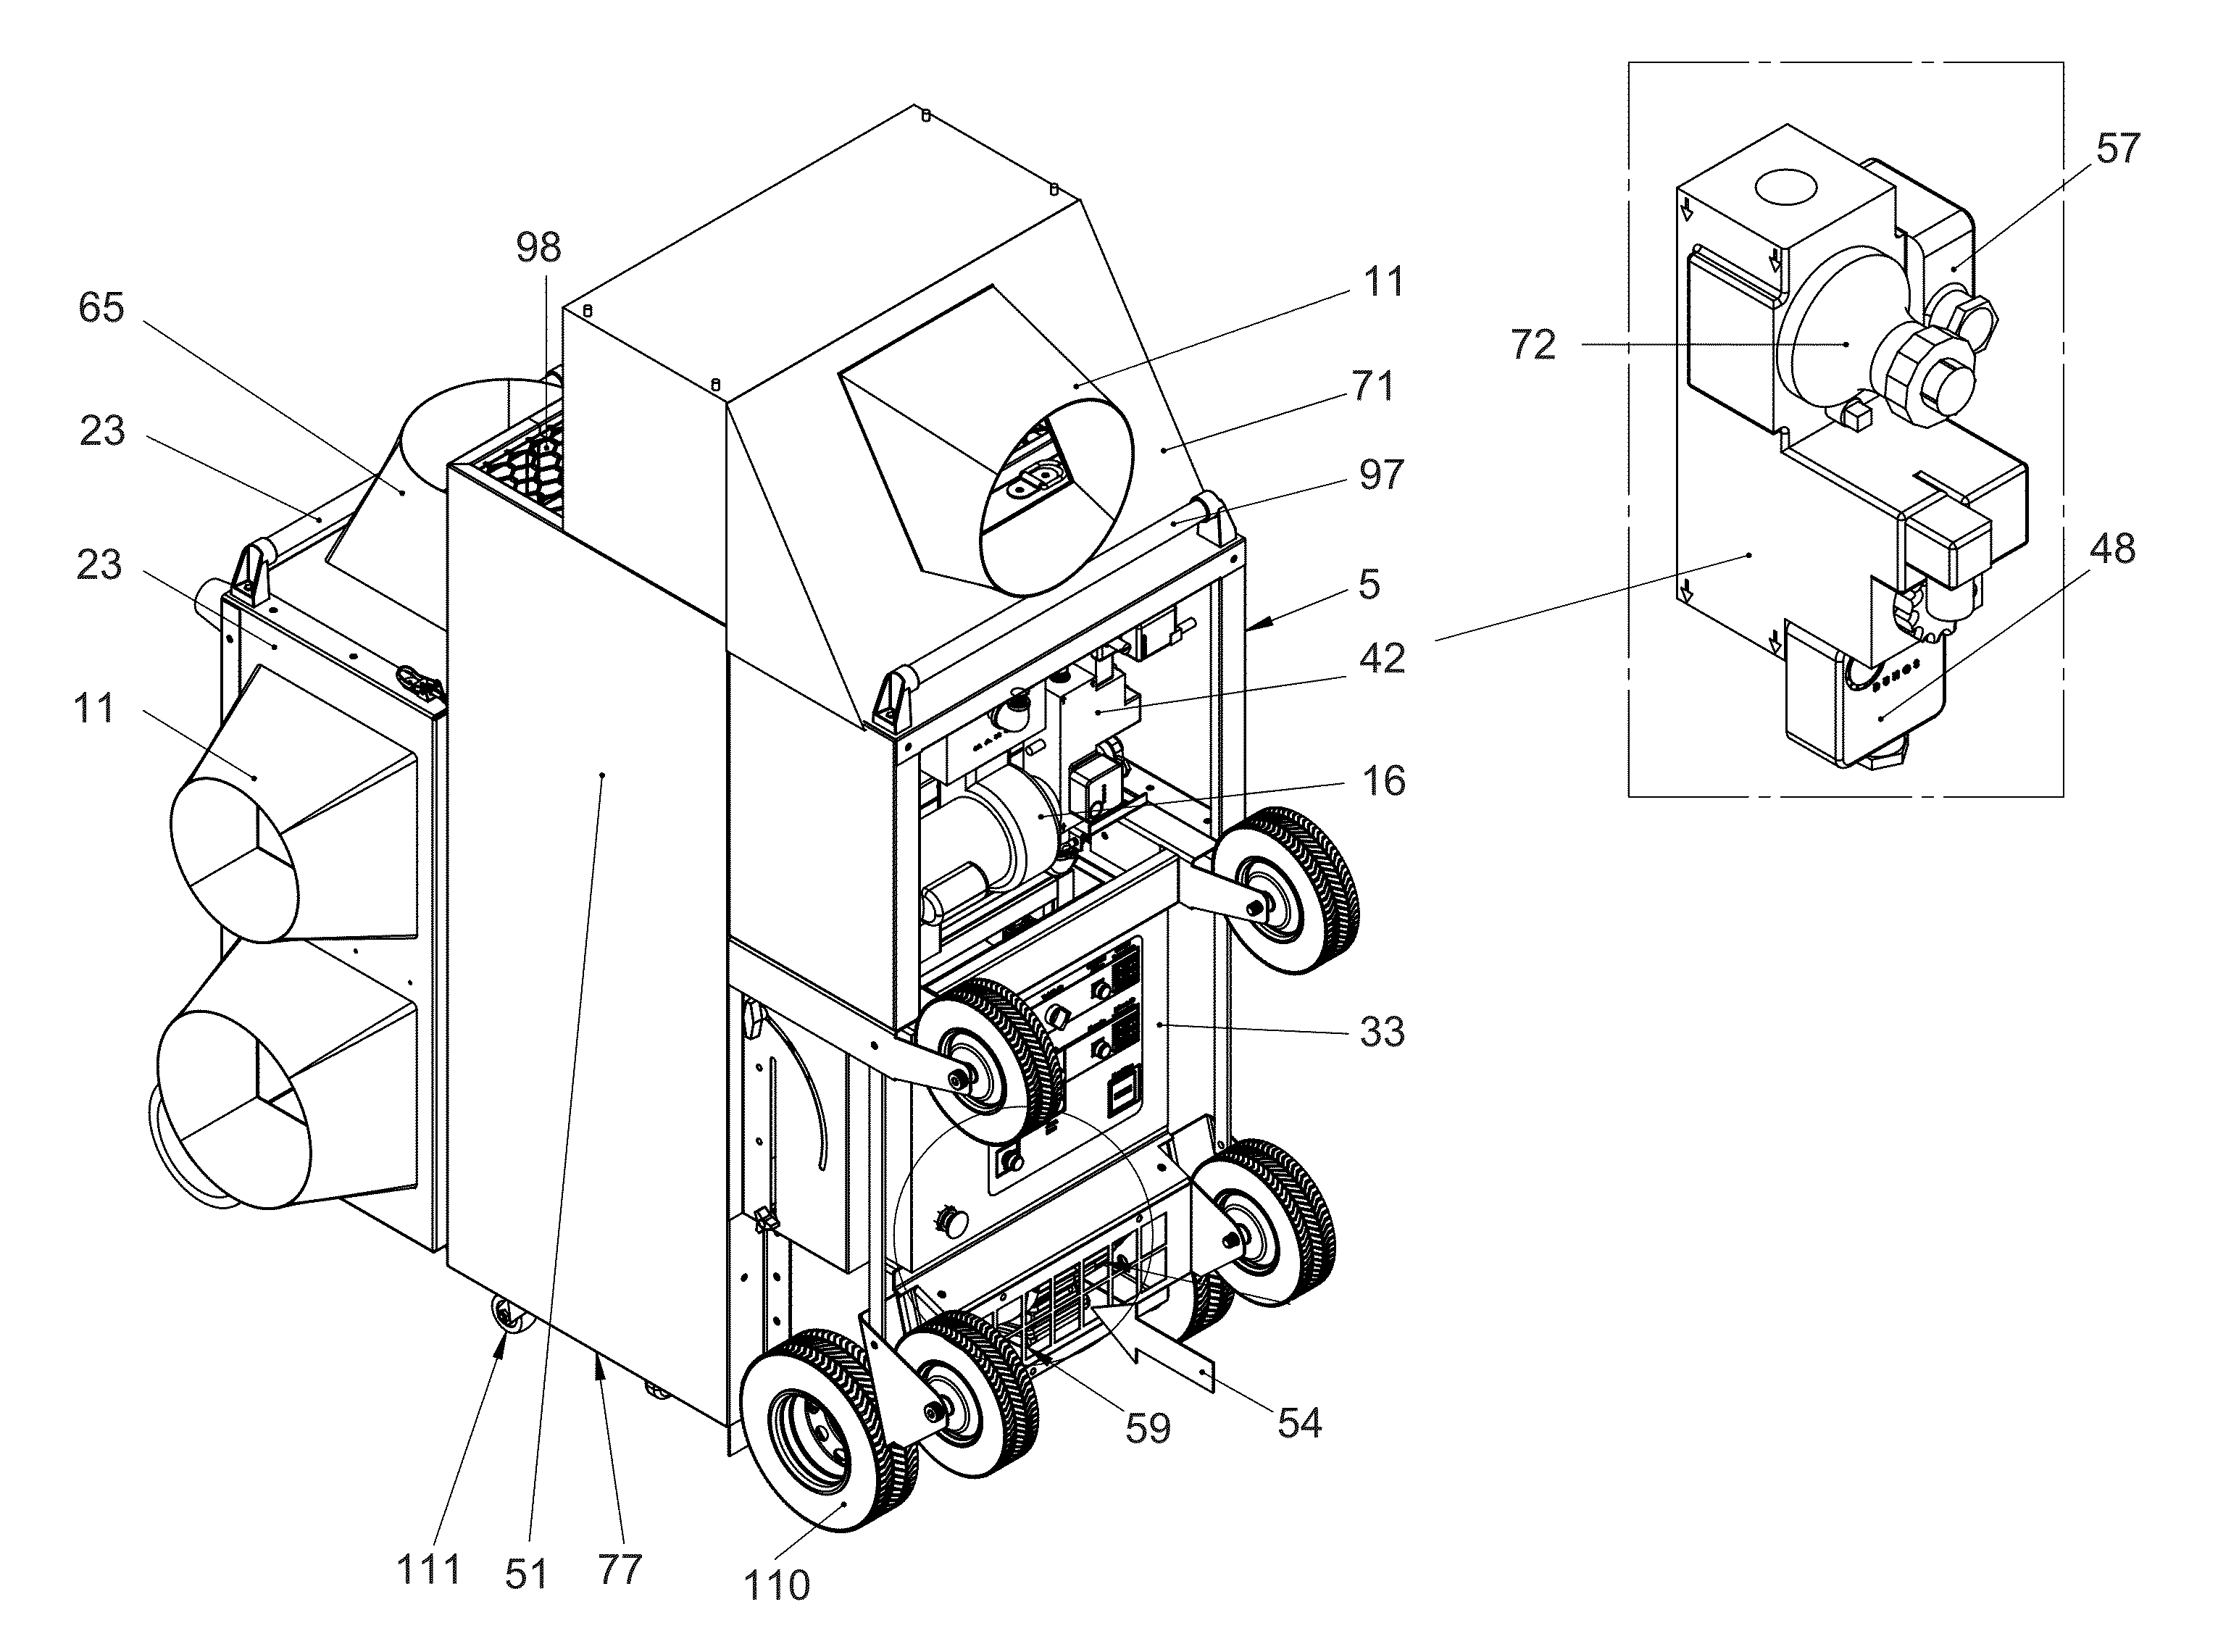 Multi-component system for treating enclosed environments